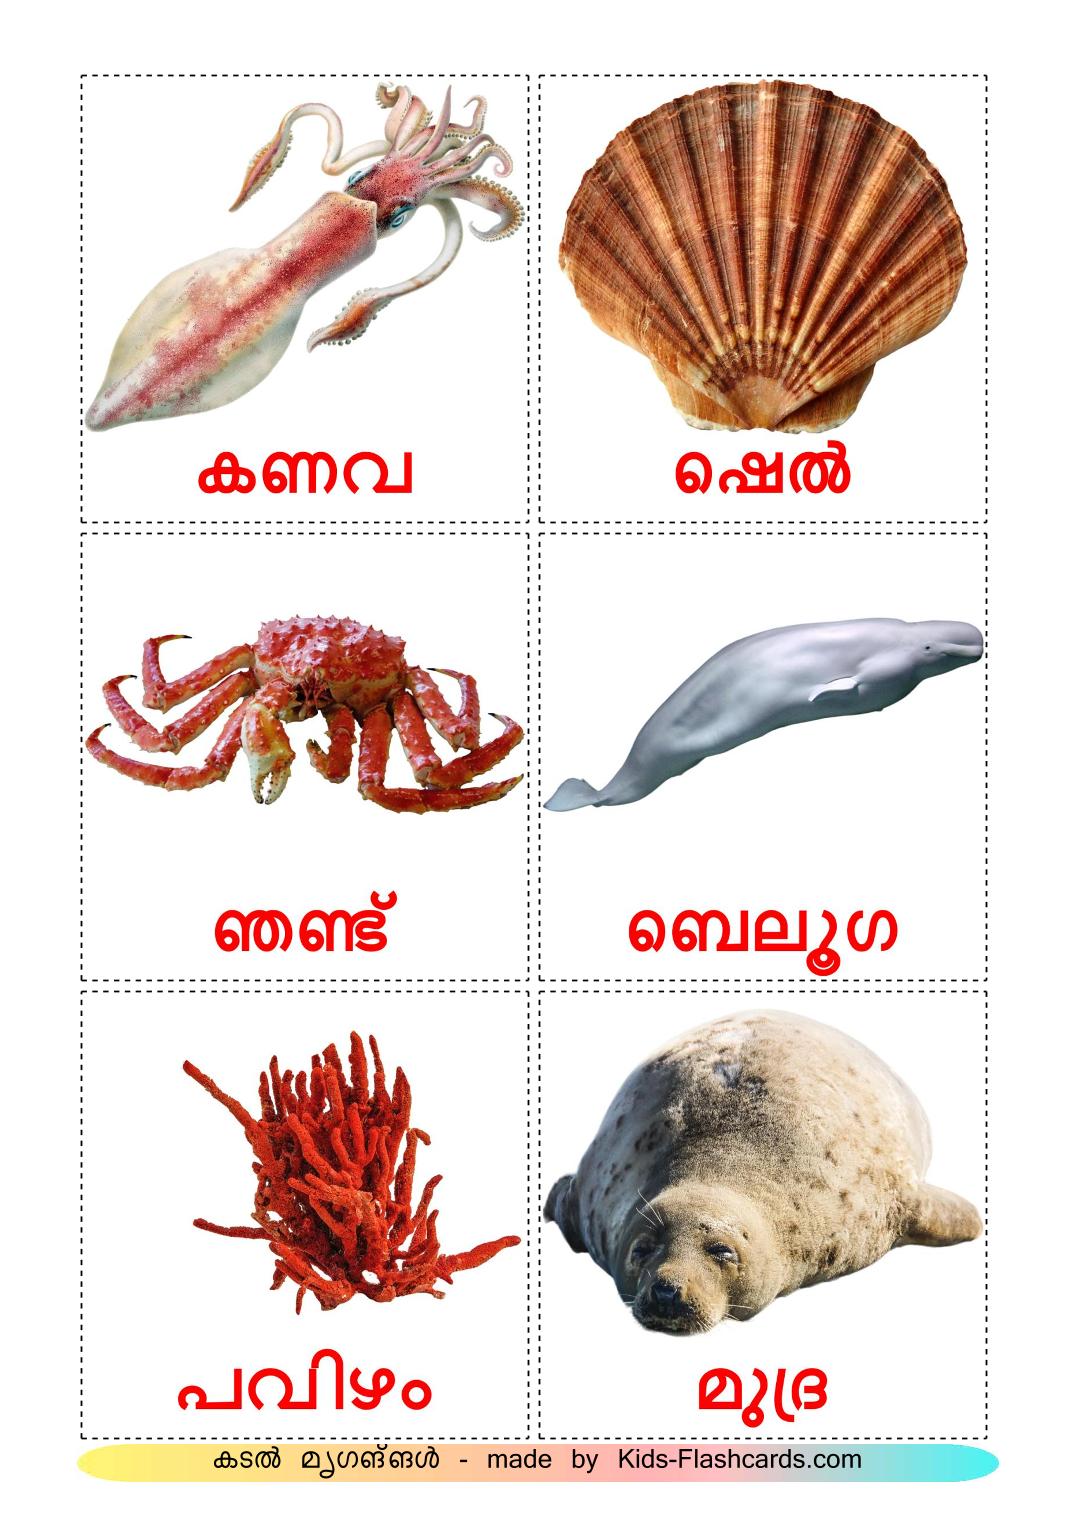 Les Animaux Marins - 29 Flashcards malayalam imprimables gratuitement